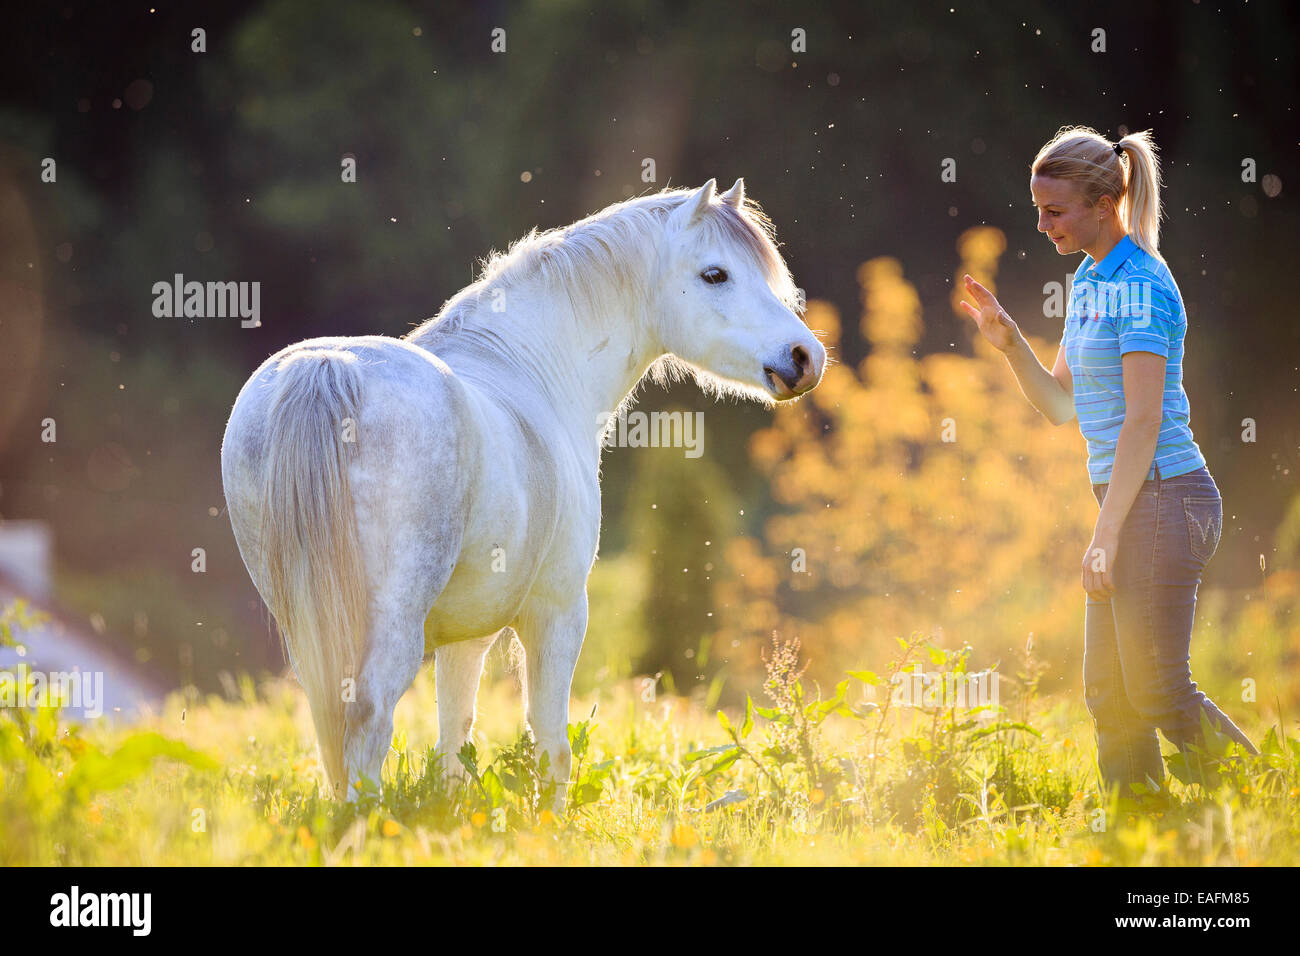 Welsh Mountain Pony Section A Gray gelding standing next to young woman pasture Austria Stock Photo